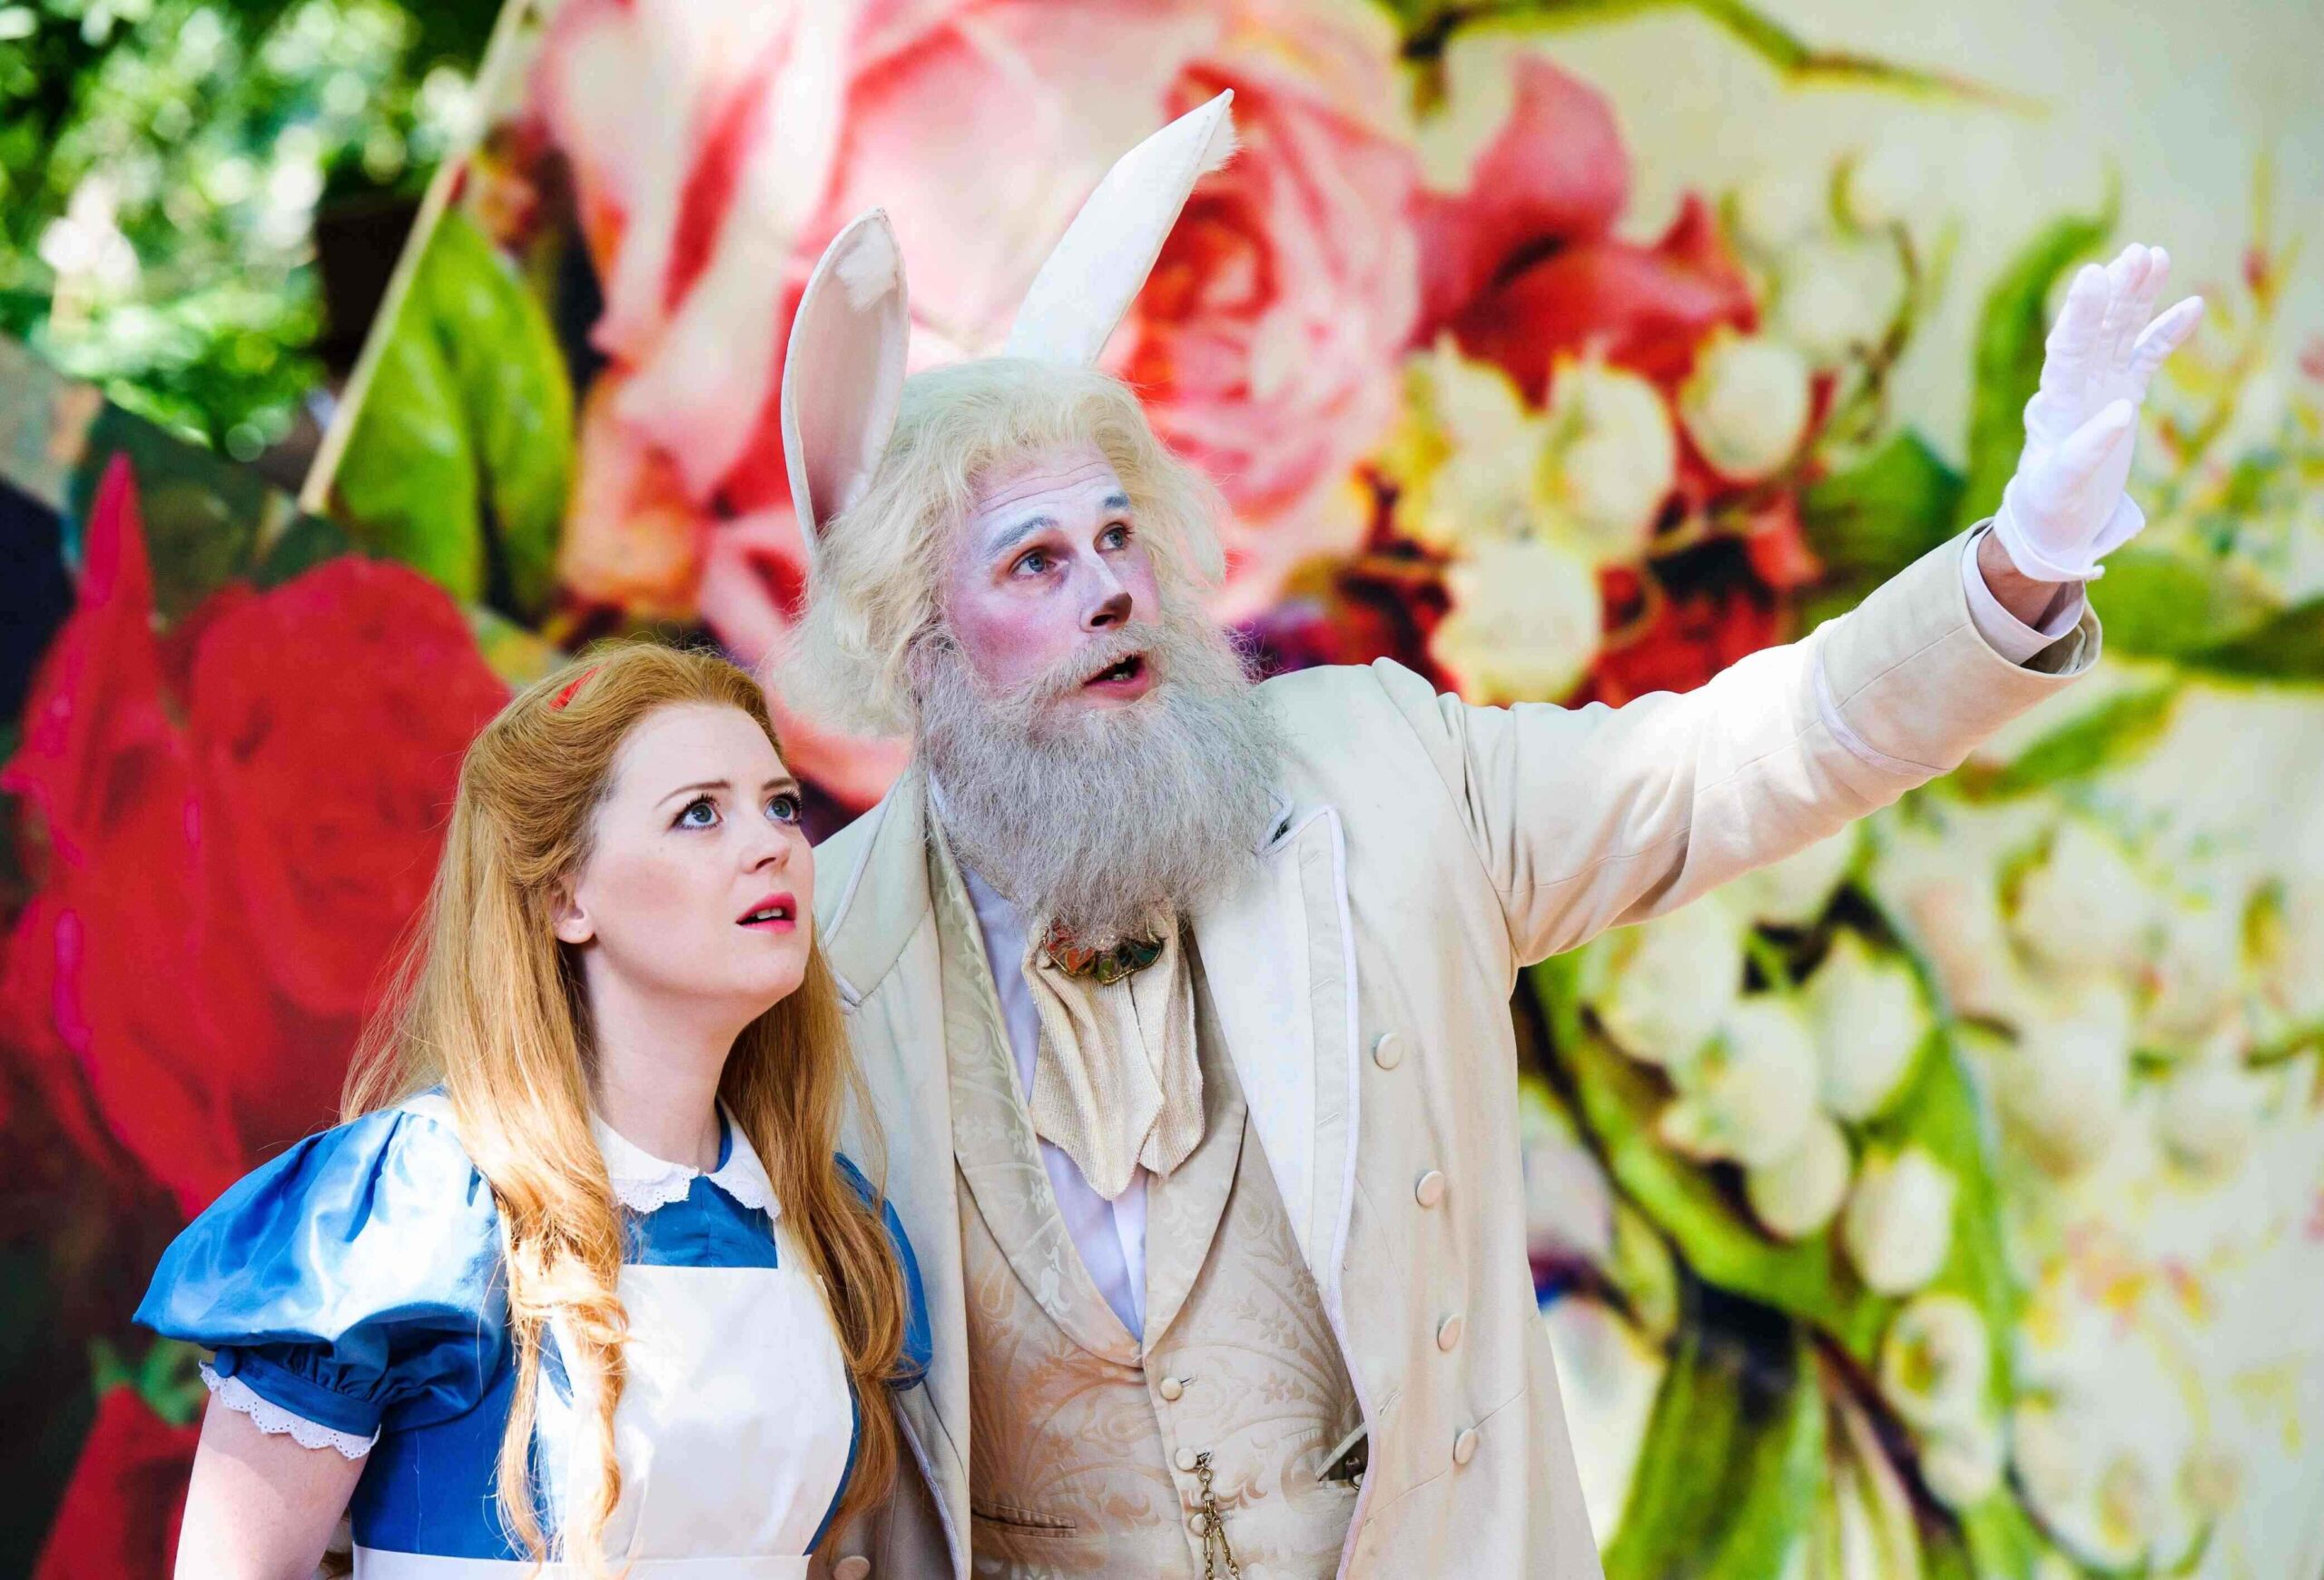 Alices Adventures in Wonderland - Opera Collective Ireland presents the Irish premiere of Alices Adventures in Wonderland, an opera for all the family based on Lewis Carroll’s beloved children’s book.